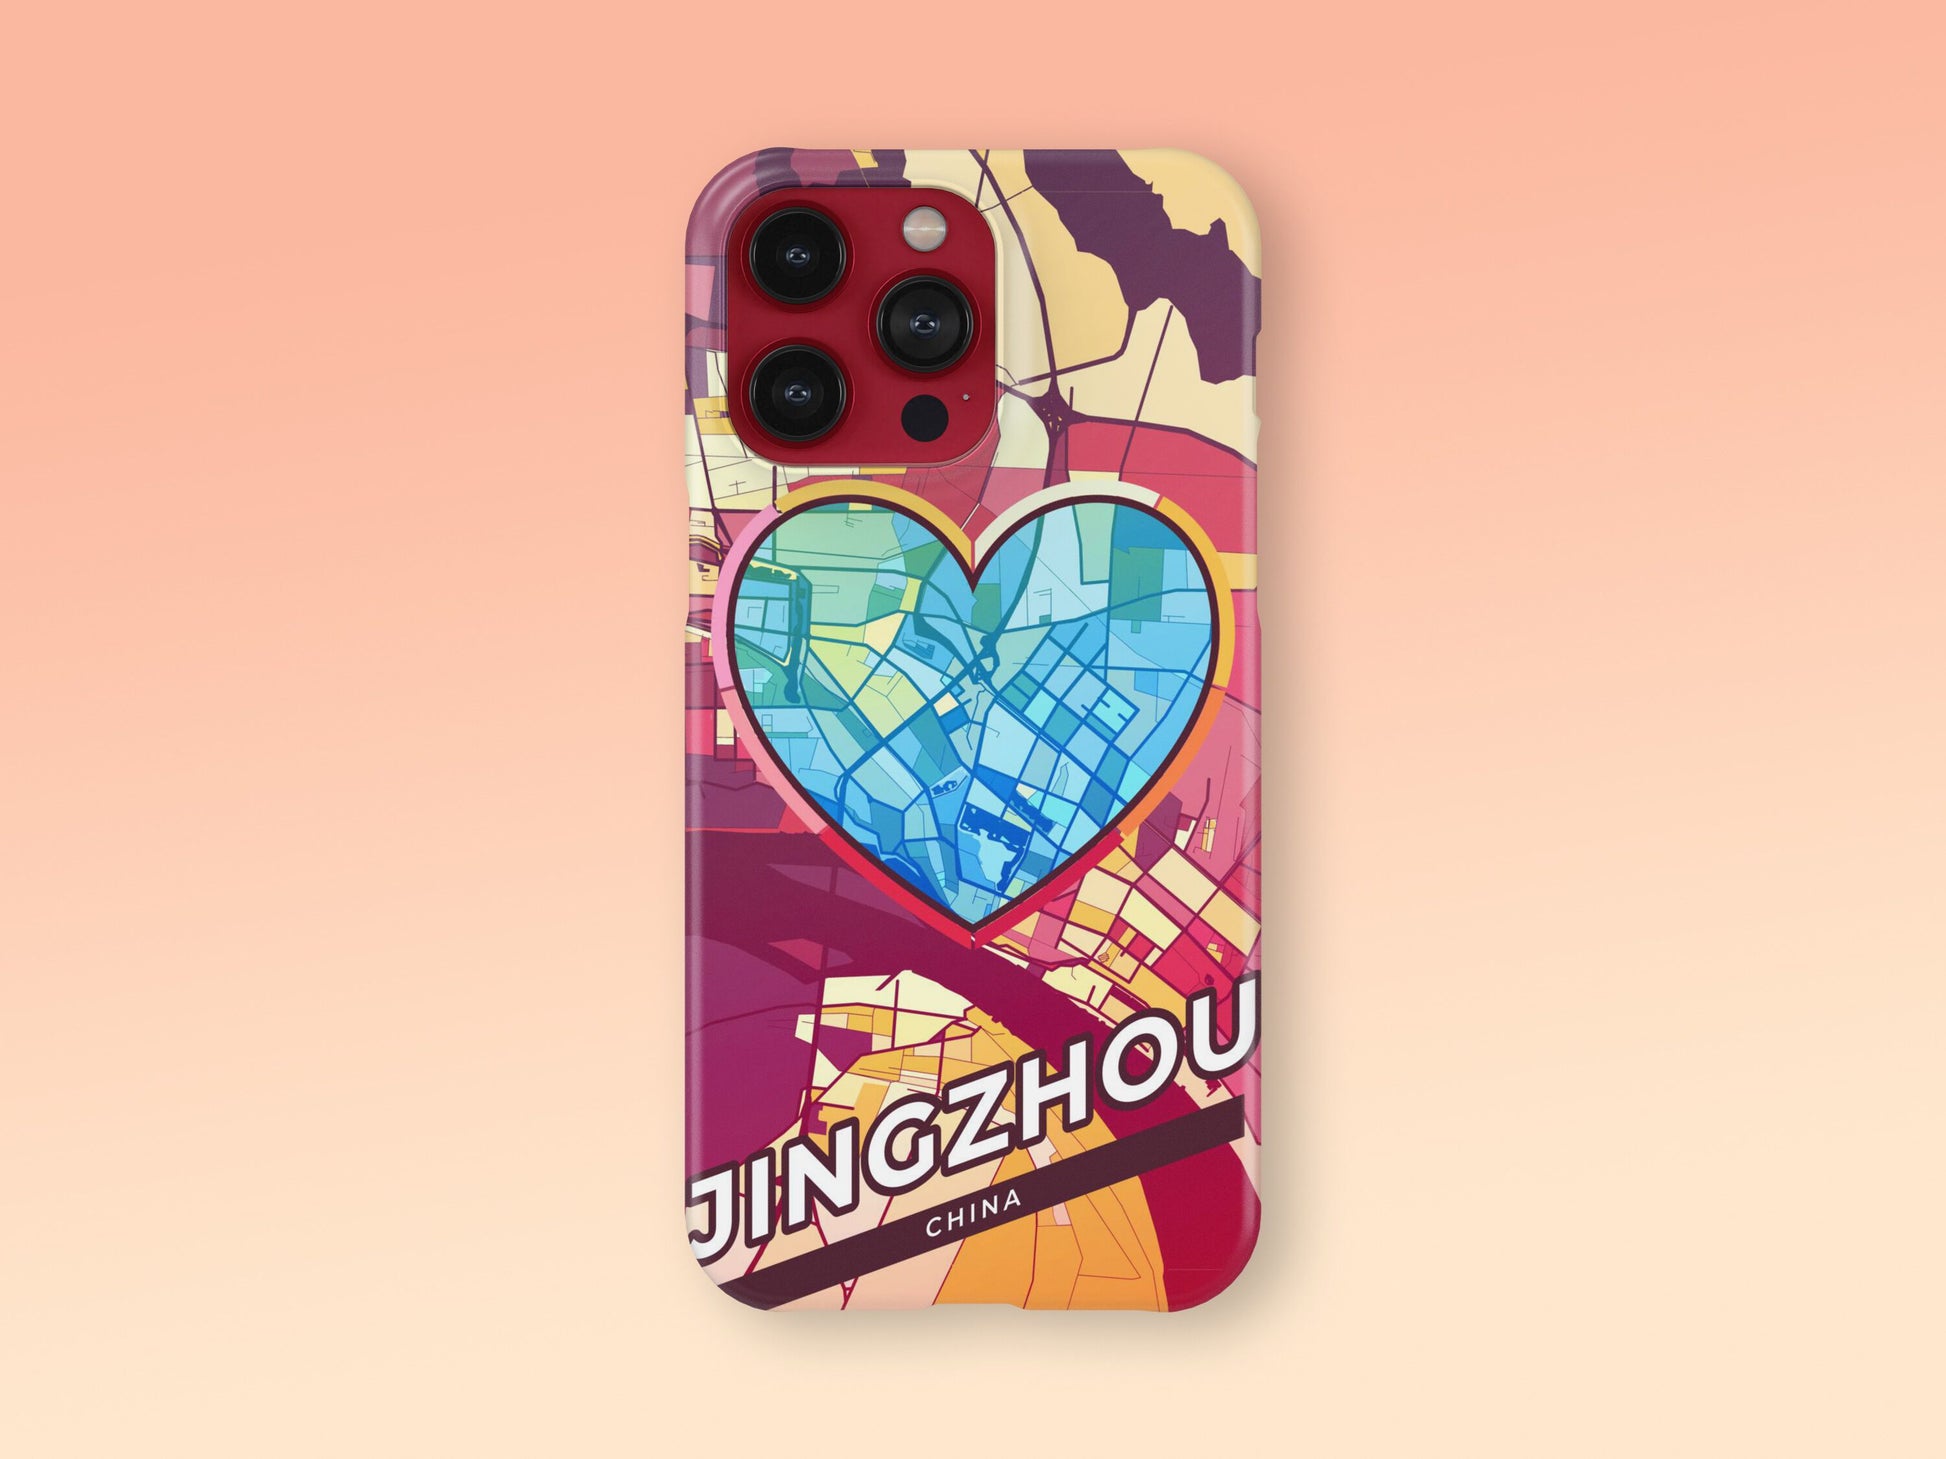 Jingzhou China slim phone case with colorful icon. Birthday, wedding or housewarming gift. Couple match cases. 2